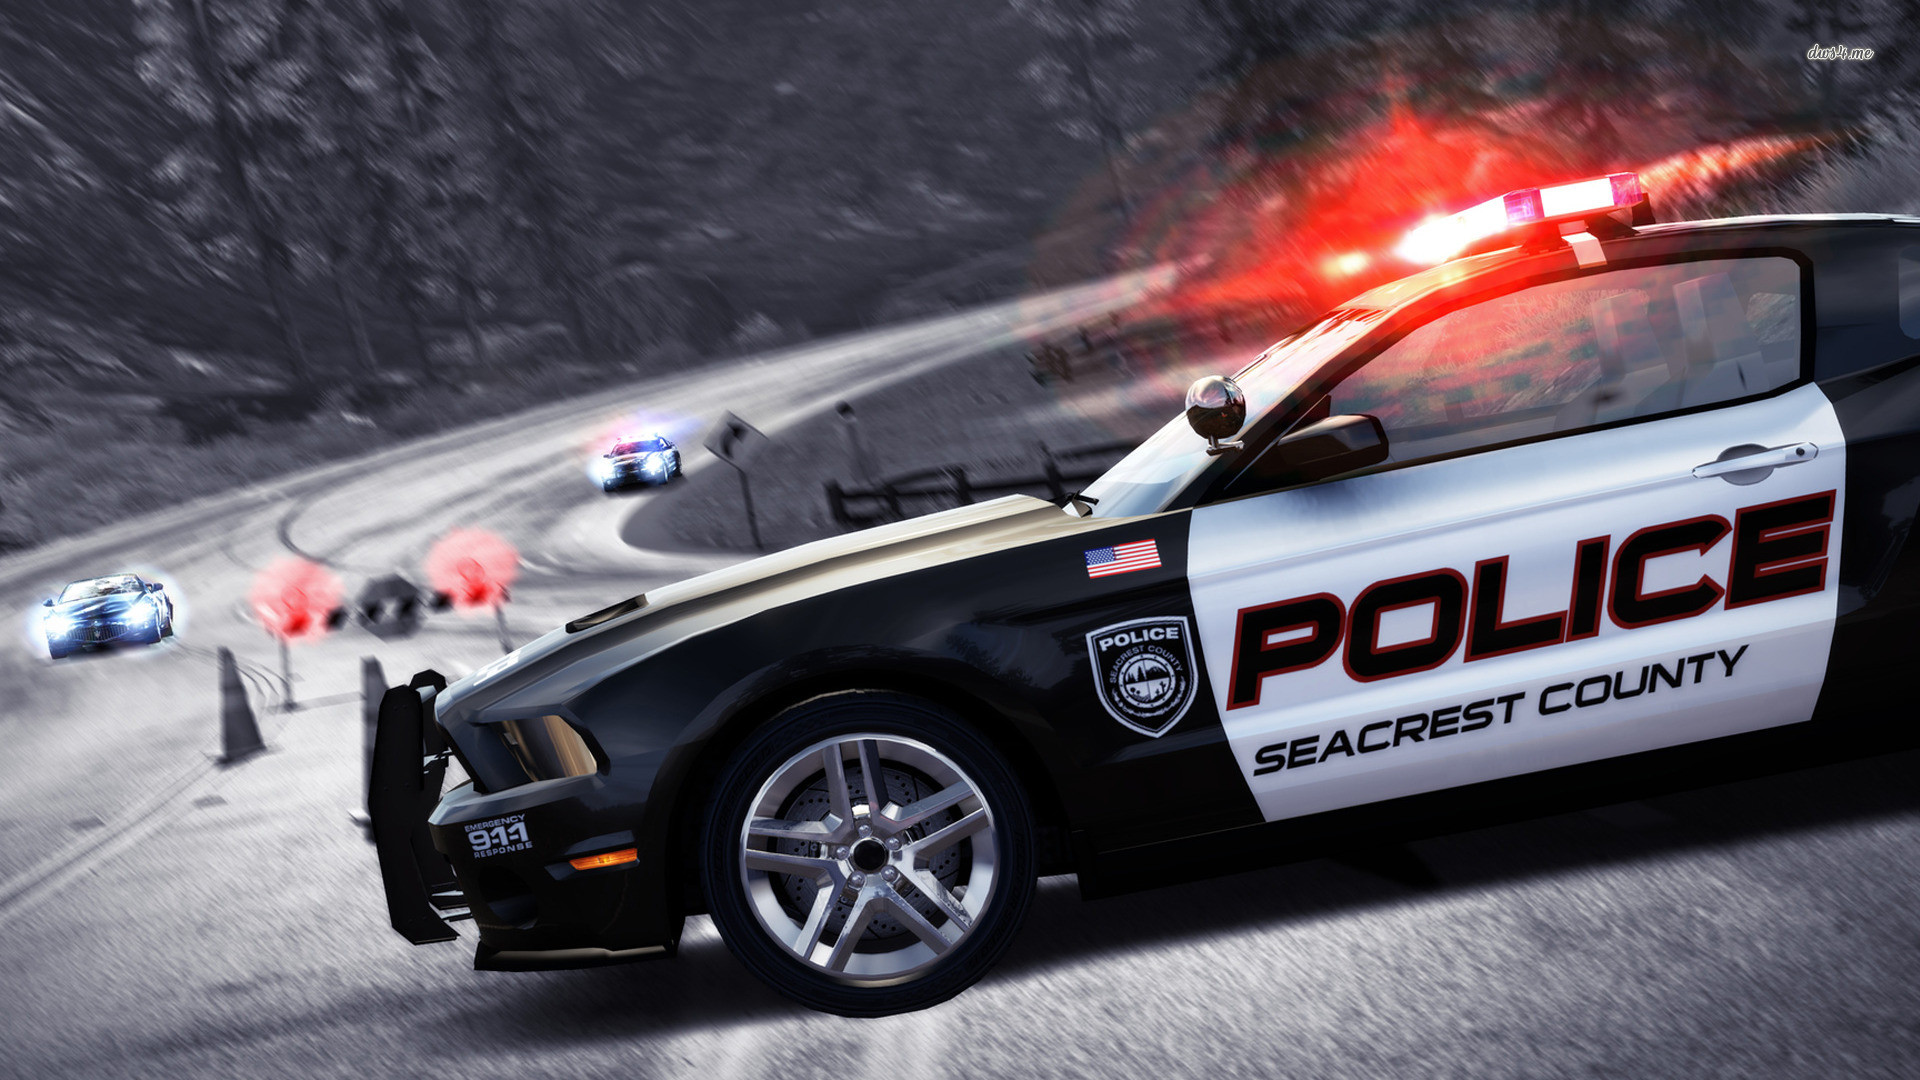 Police Officer - Police Car Wallpaper Hd , HD Wallpaper & Backgrounds